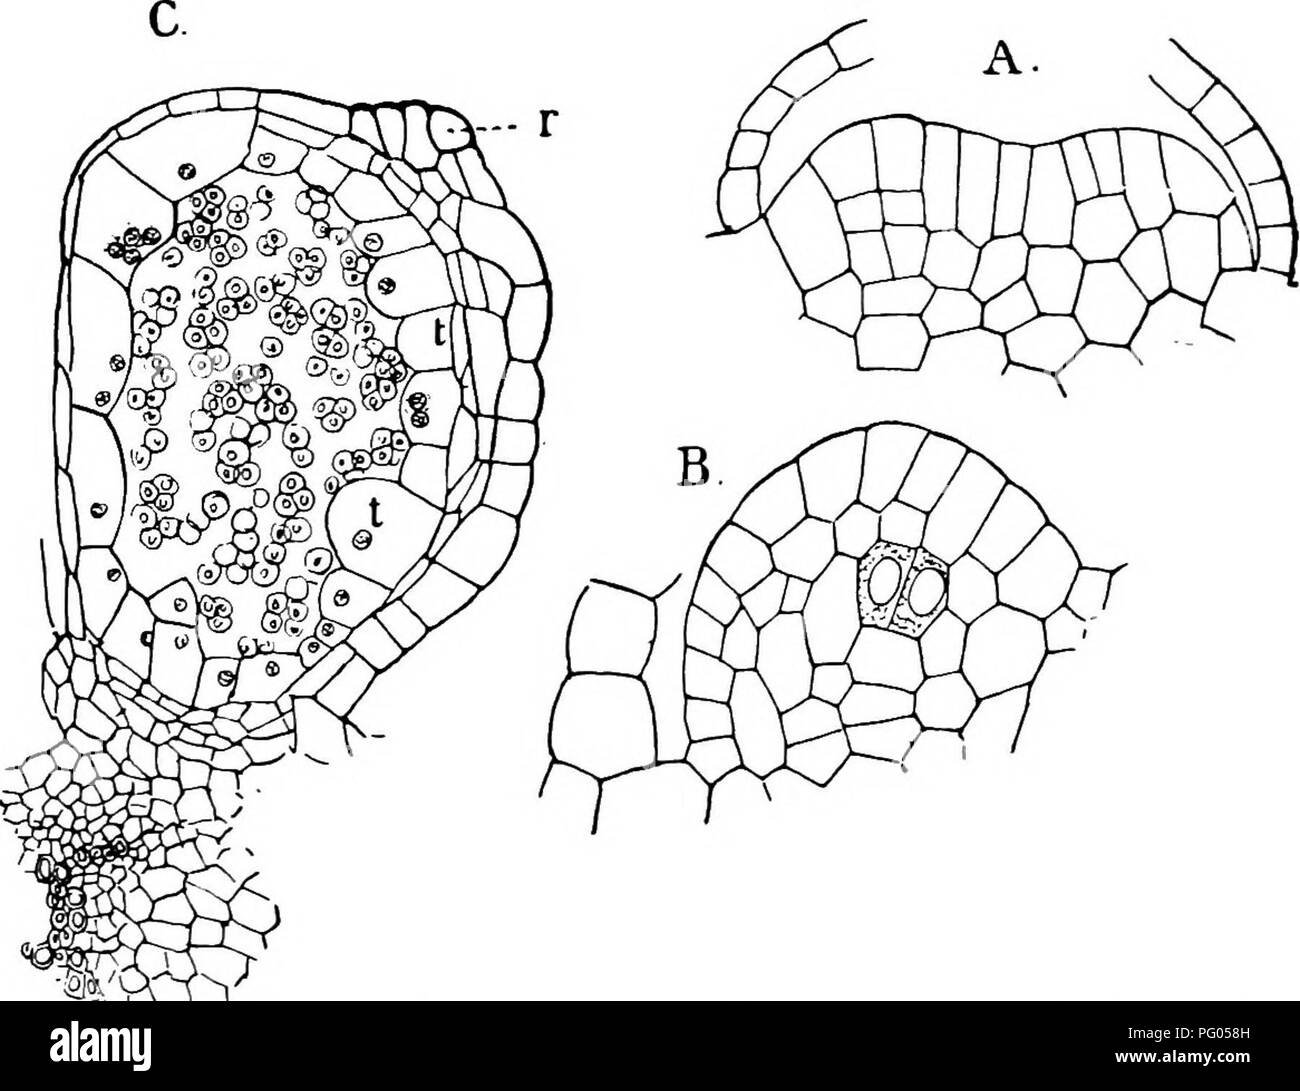 . The structure and development of mosses and ferns (Archegoniatae). Plant morphology; Mosses; Ferns. MARATTIALES 293 between. In each half there are differentiated the separate archesporial groups of cells corresponding to the separate chambers found in the complete synangium.&quot; The whole process takes, according to his account, about six months. Luerssen was unable either in Marattia or Angiopteris to trace back the archesporium to a single cell, which Goebel (3) claims is present in the latter. In Angiopteris the process begins as in Marattia^ but at a period when the leaf is almost com Stock Photo